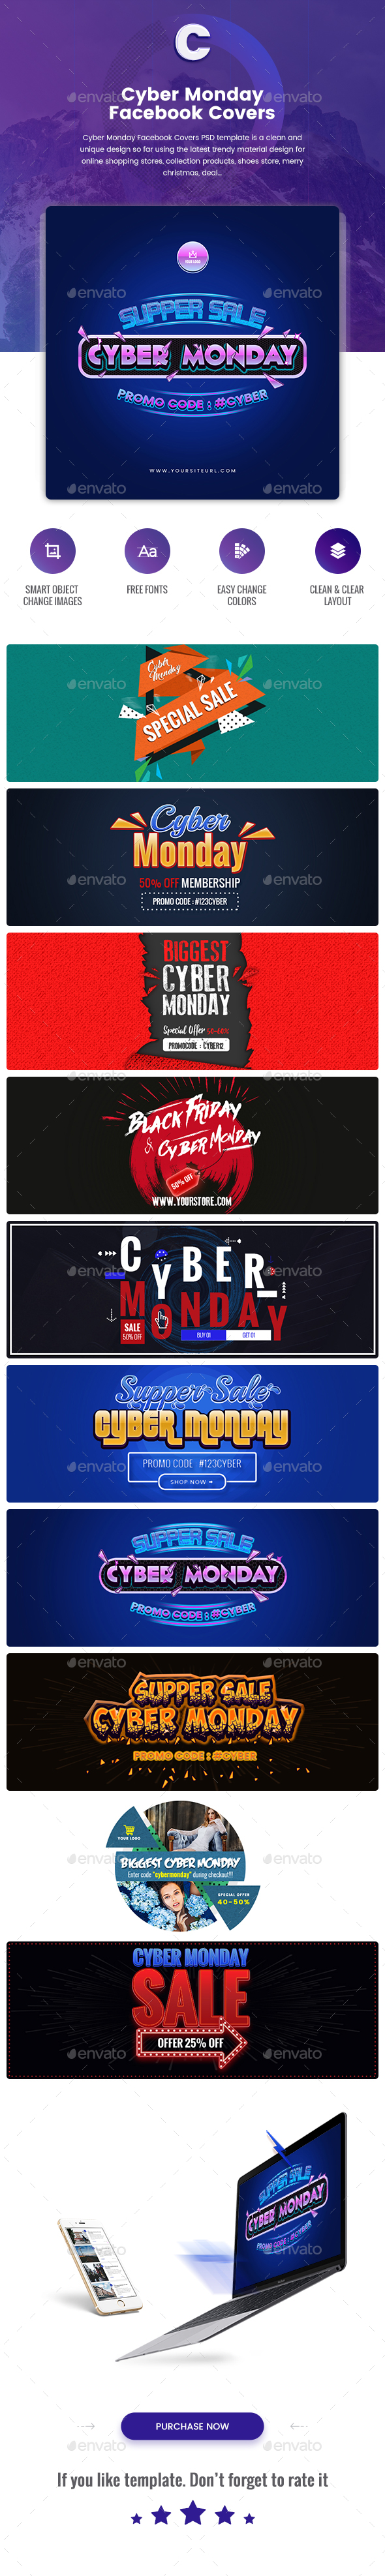 Cyber Monday Facebook Timeline Covers - 10 PSD